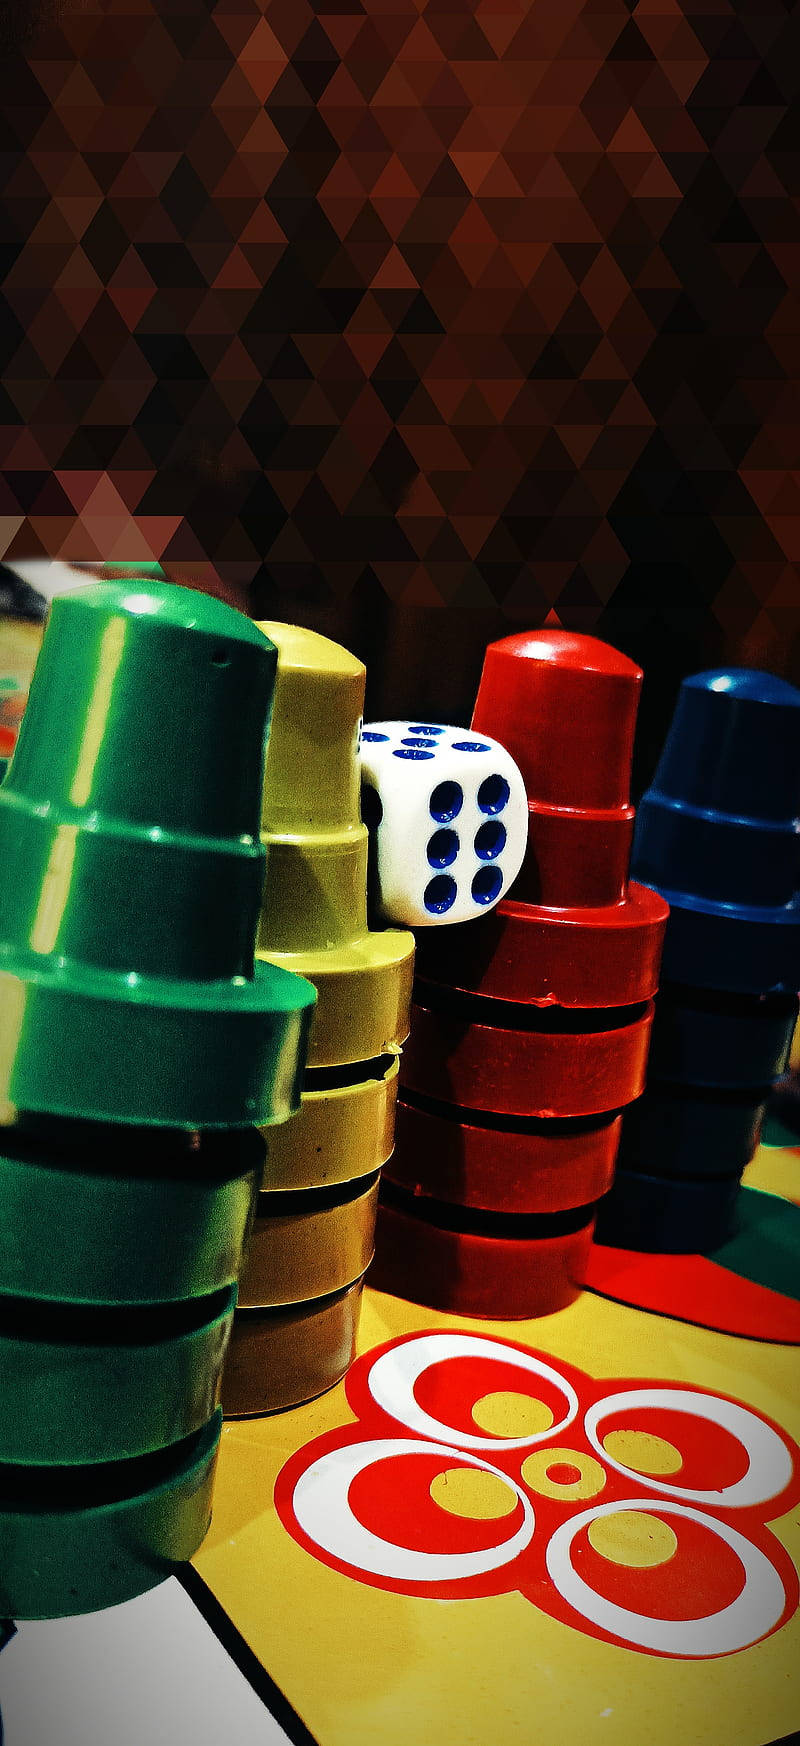 Ludo King Tokens And Dice Wallpaper